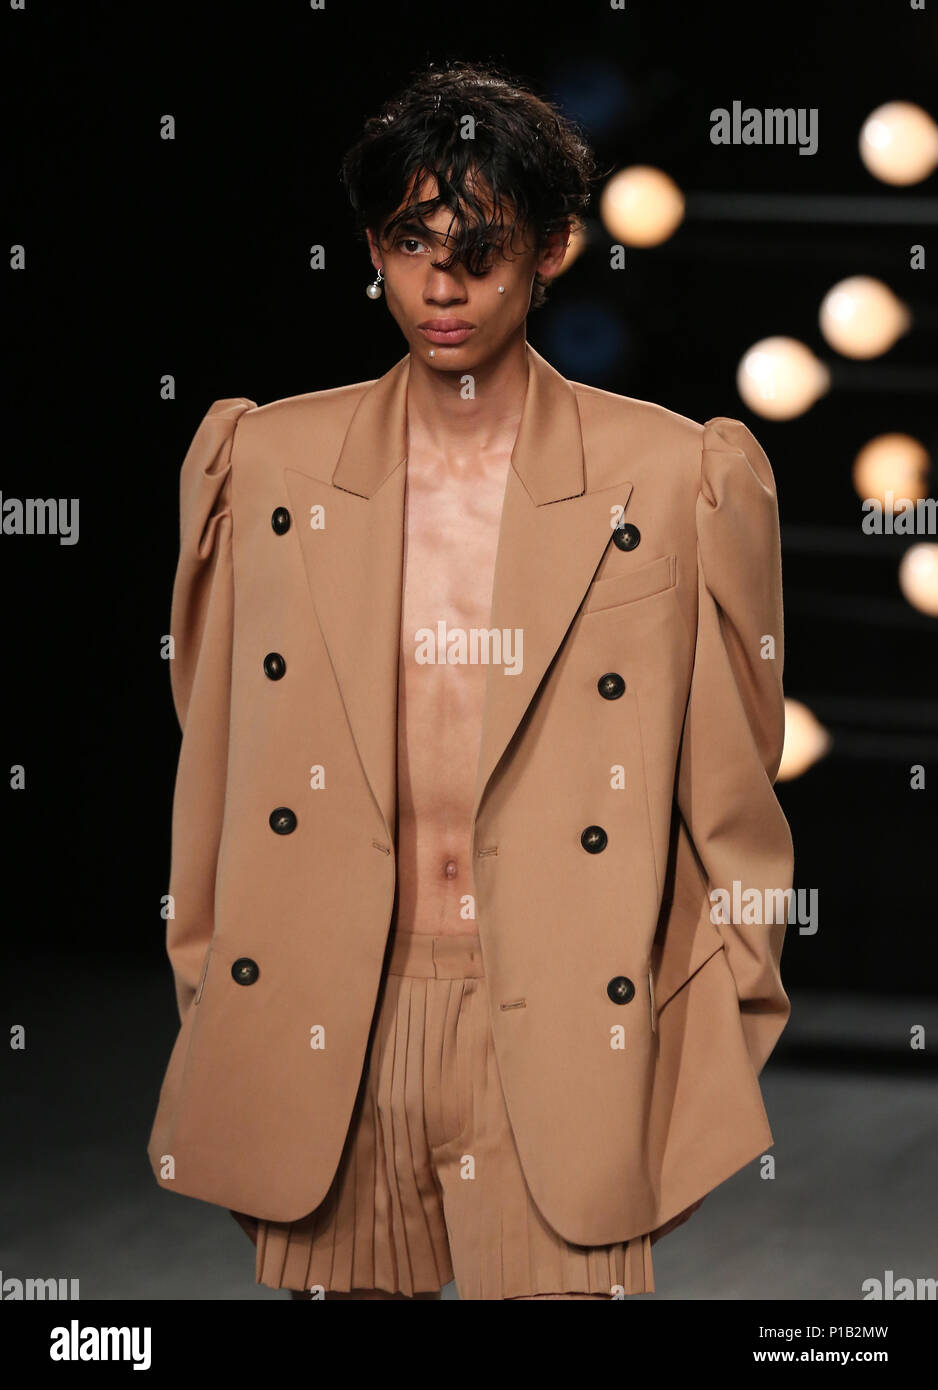 Models on the catwalk the Blindness London Fashion Week Men's SS19 show at the BFC Showspace, London Stock Photo